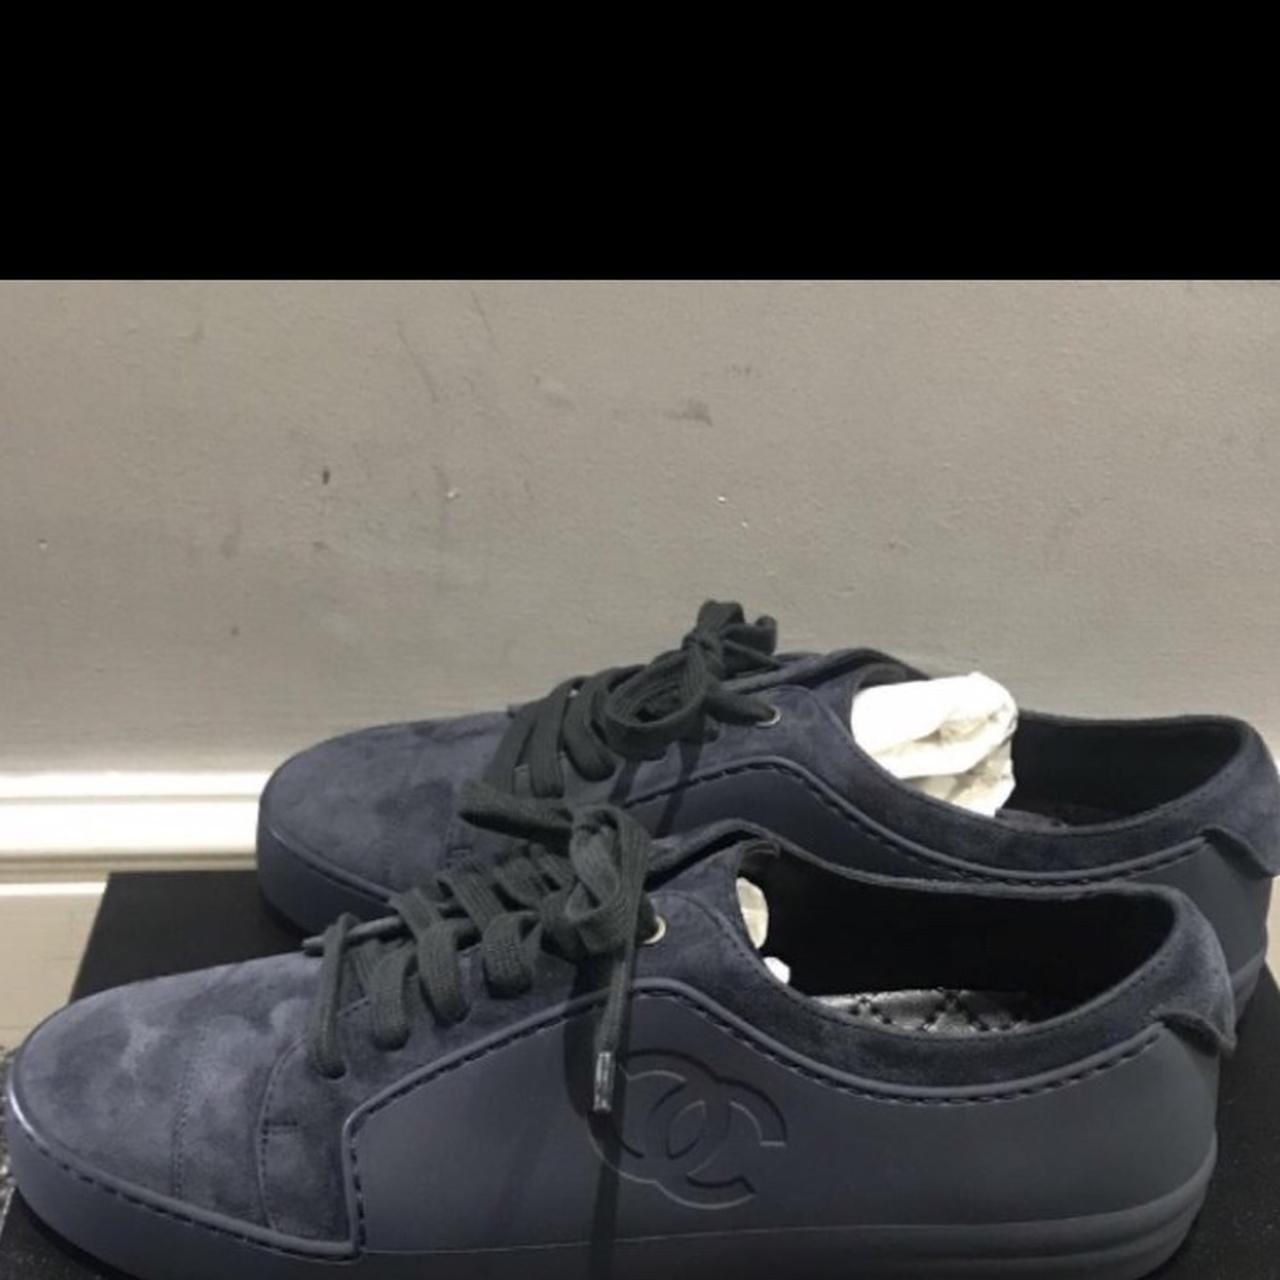 I looking for these Chanel trainers in uk size 10 Eu - Depop